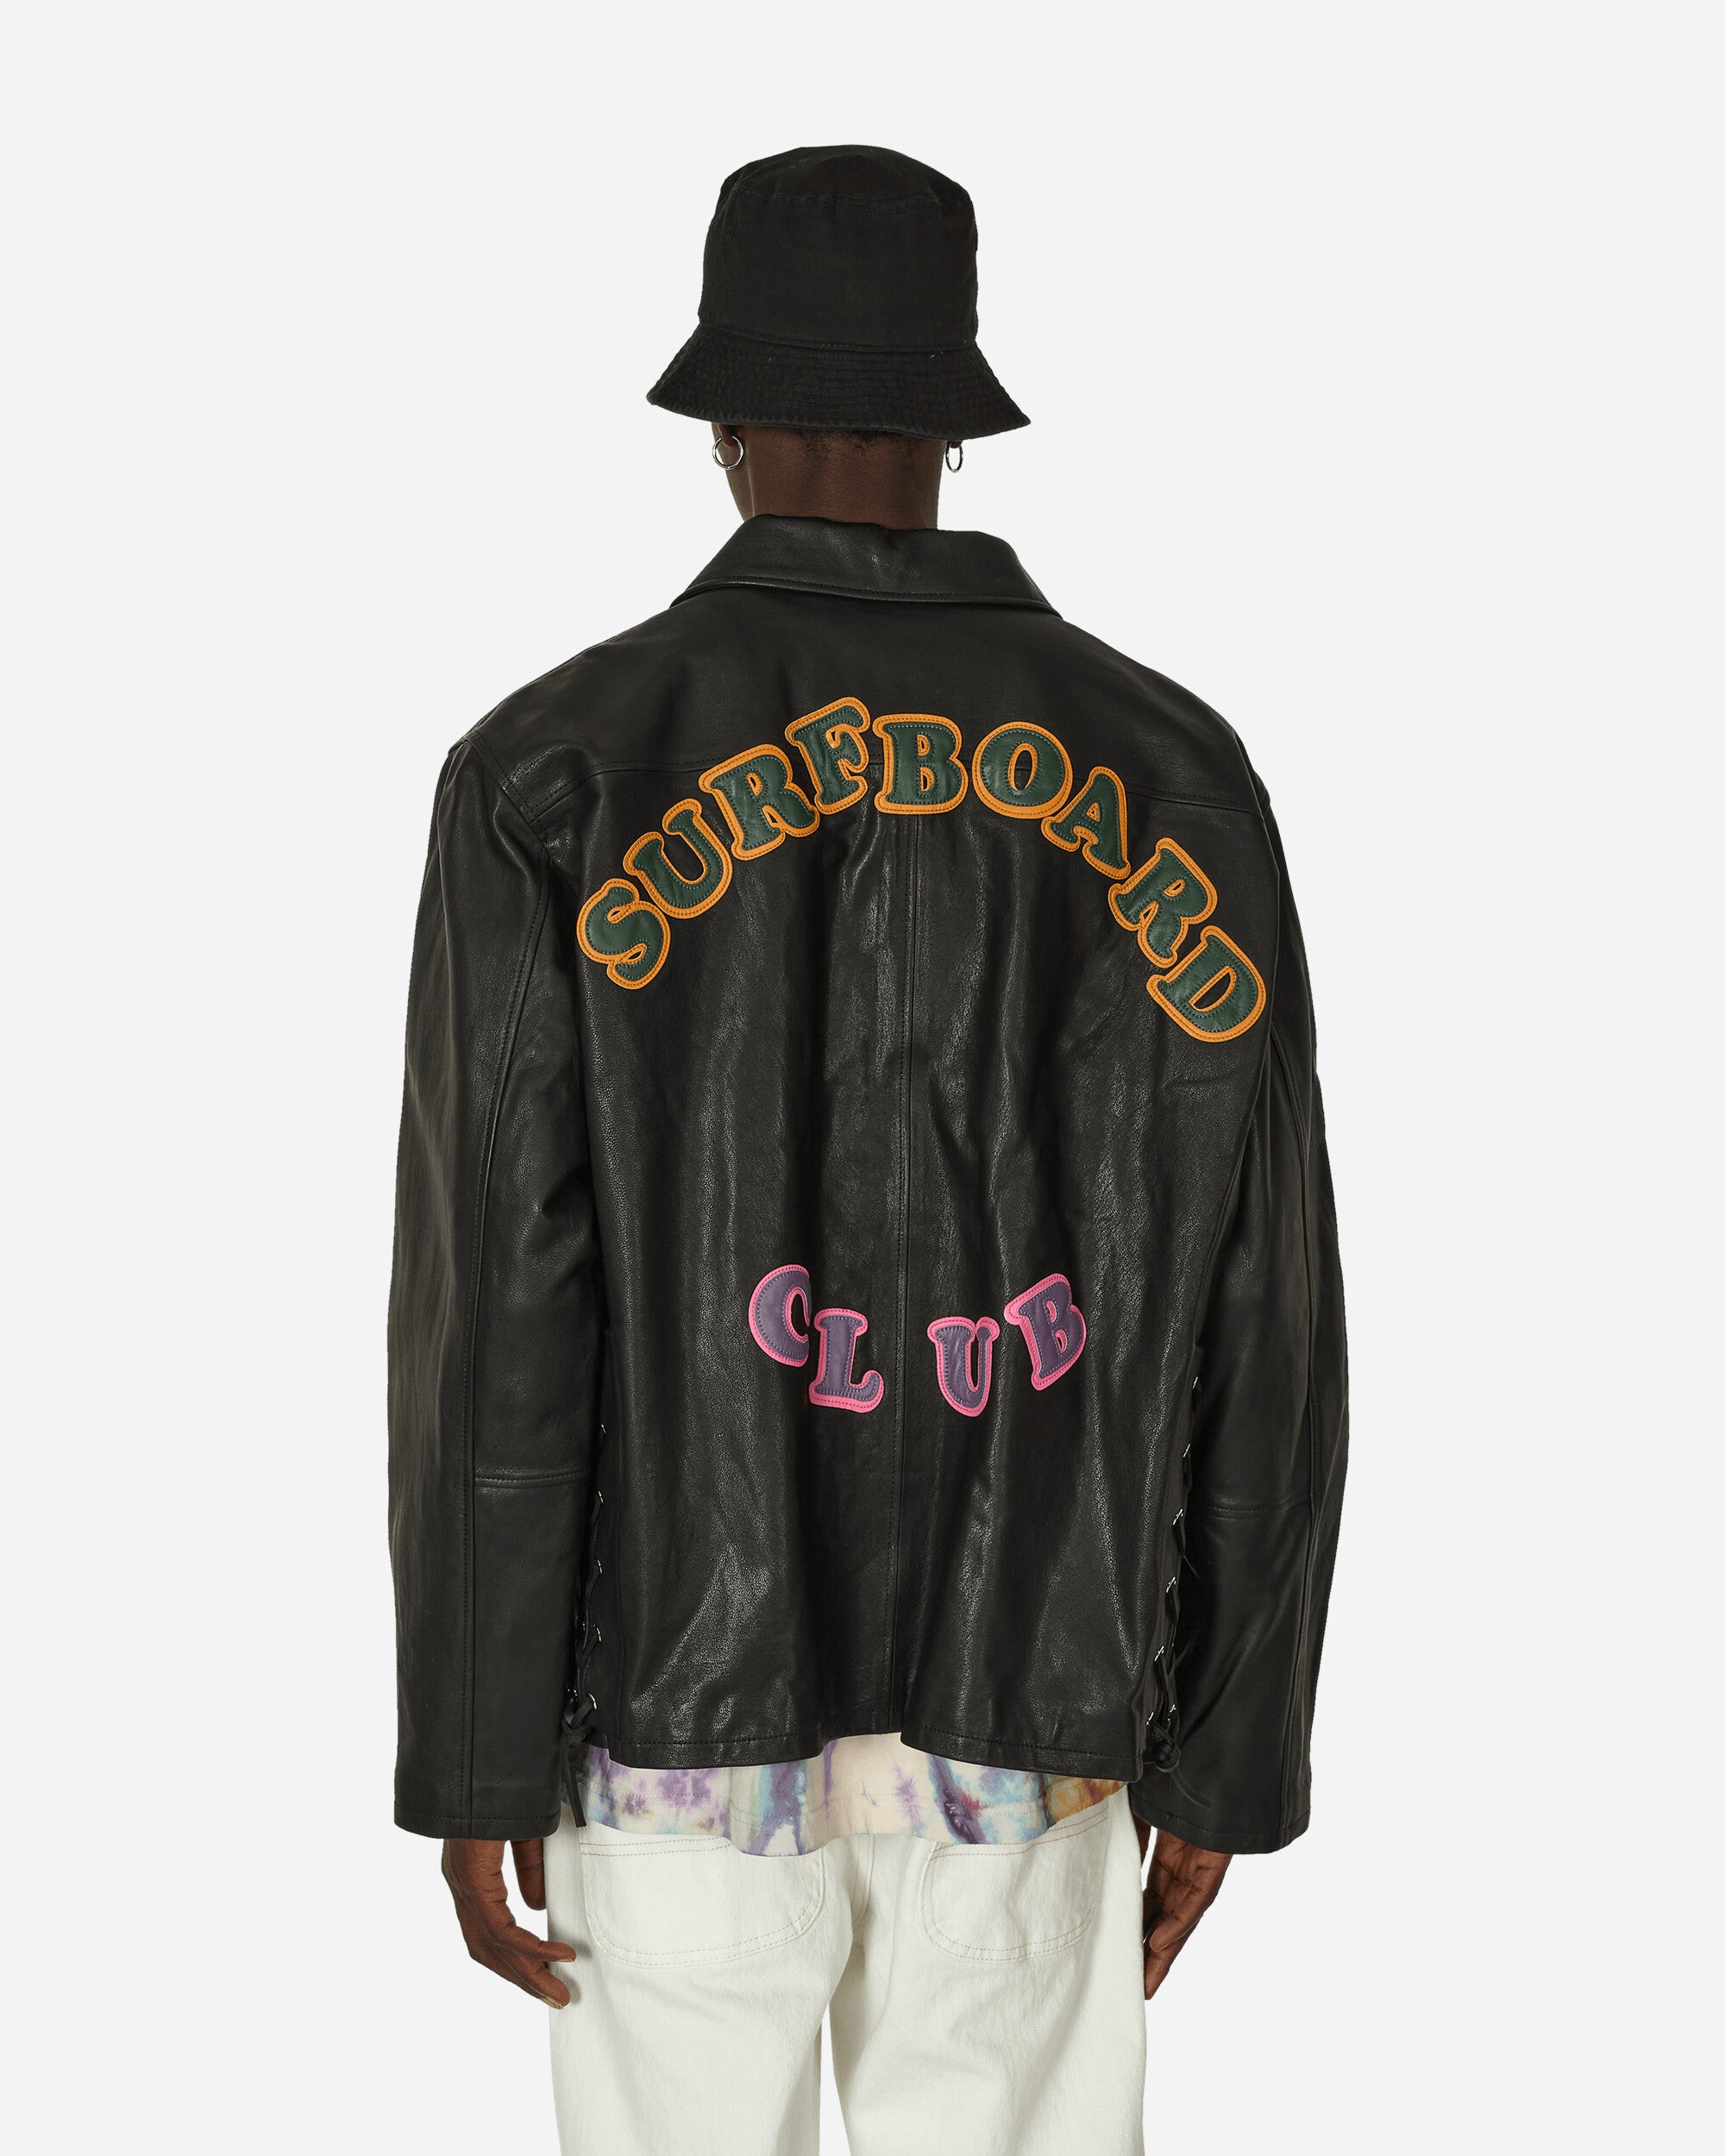 Stockholm (Surfboard) Club Coach Leather Jacket Black Coats and Jackets Leather Jackets CU9B90 001